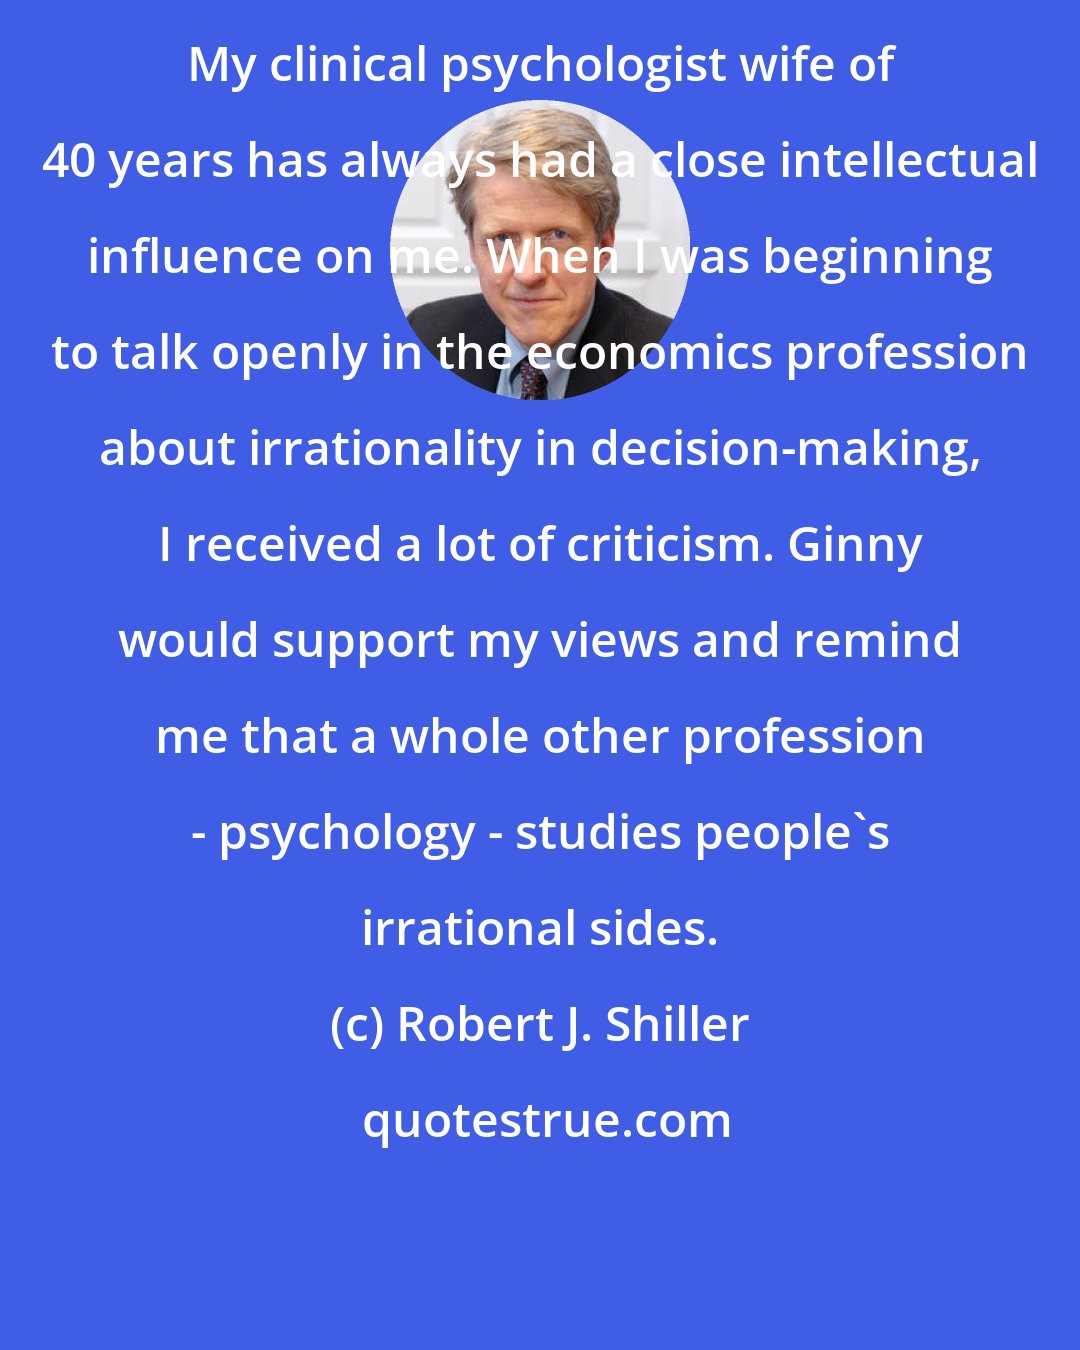 Robert J. Shiller: My clinical psychologist wife of 40 years has always had a close intellectual influence on me. When I was beginning to talk openly in the economics profession about irrationality in decision-making, I received a lot of criticism. Ginny would support my views and remind me that a whole other profession - psychology - studies people's irrational sides.